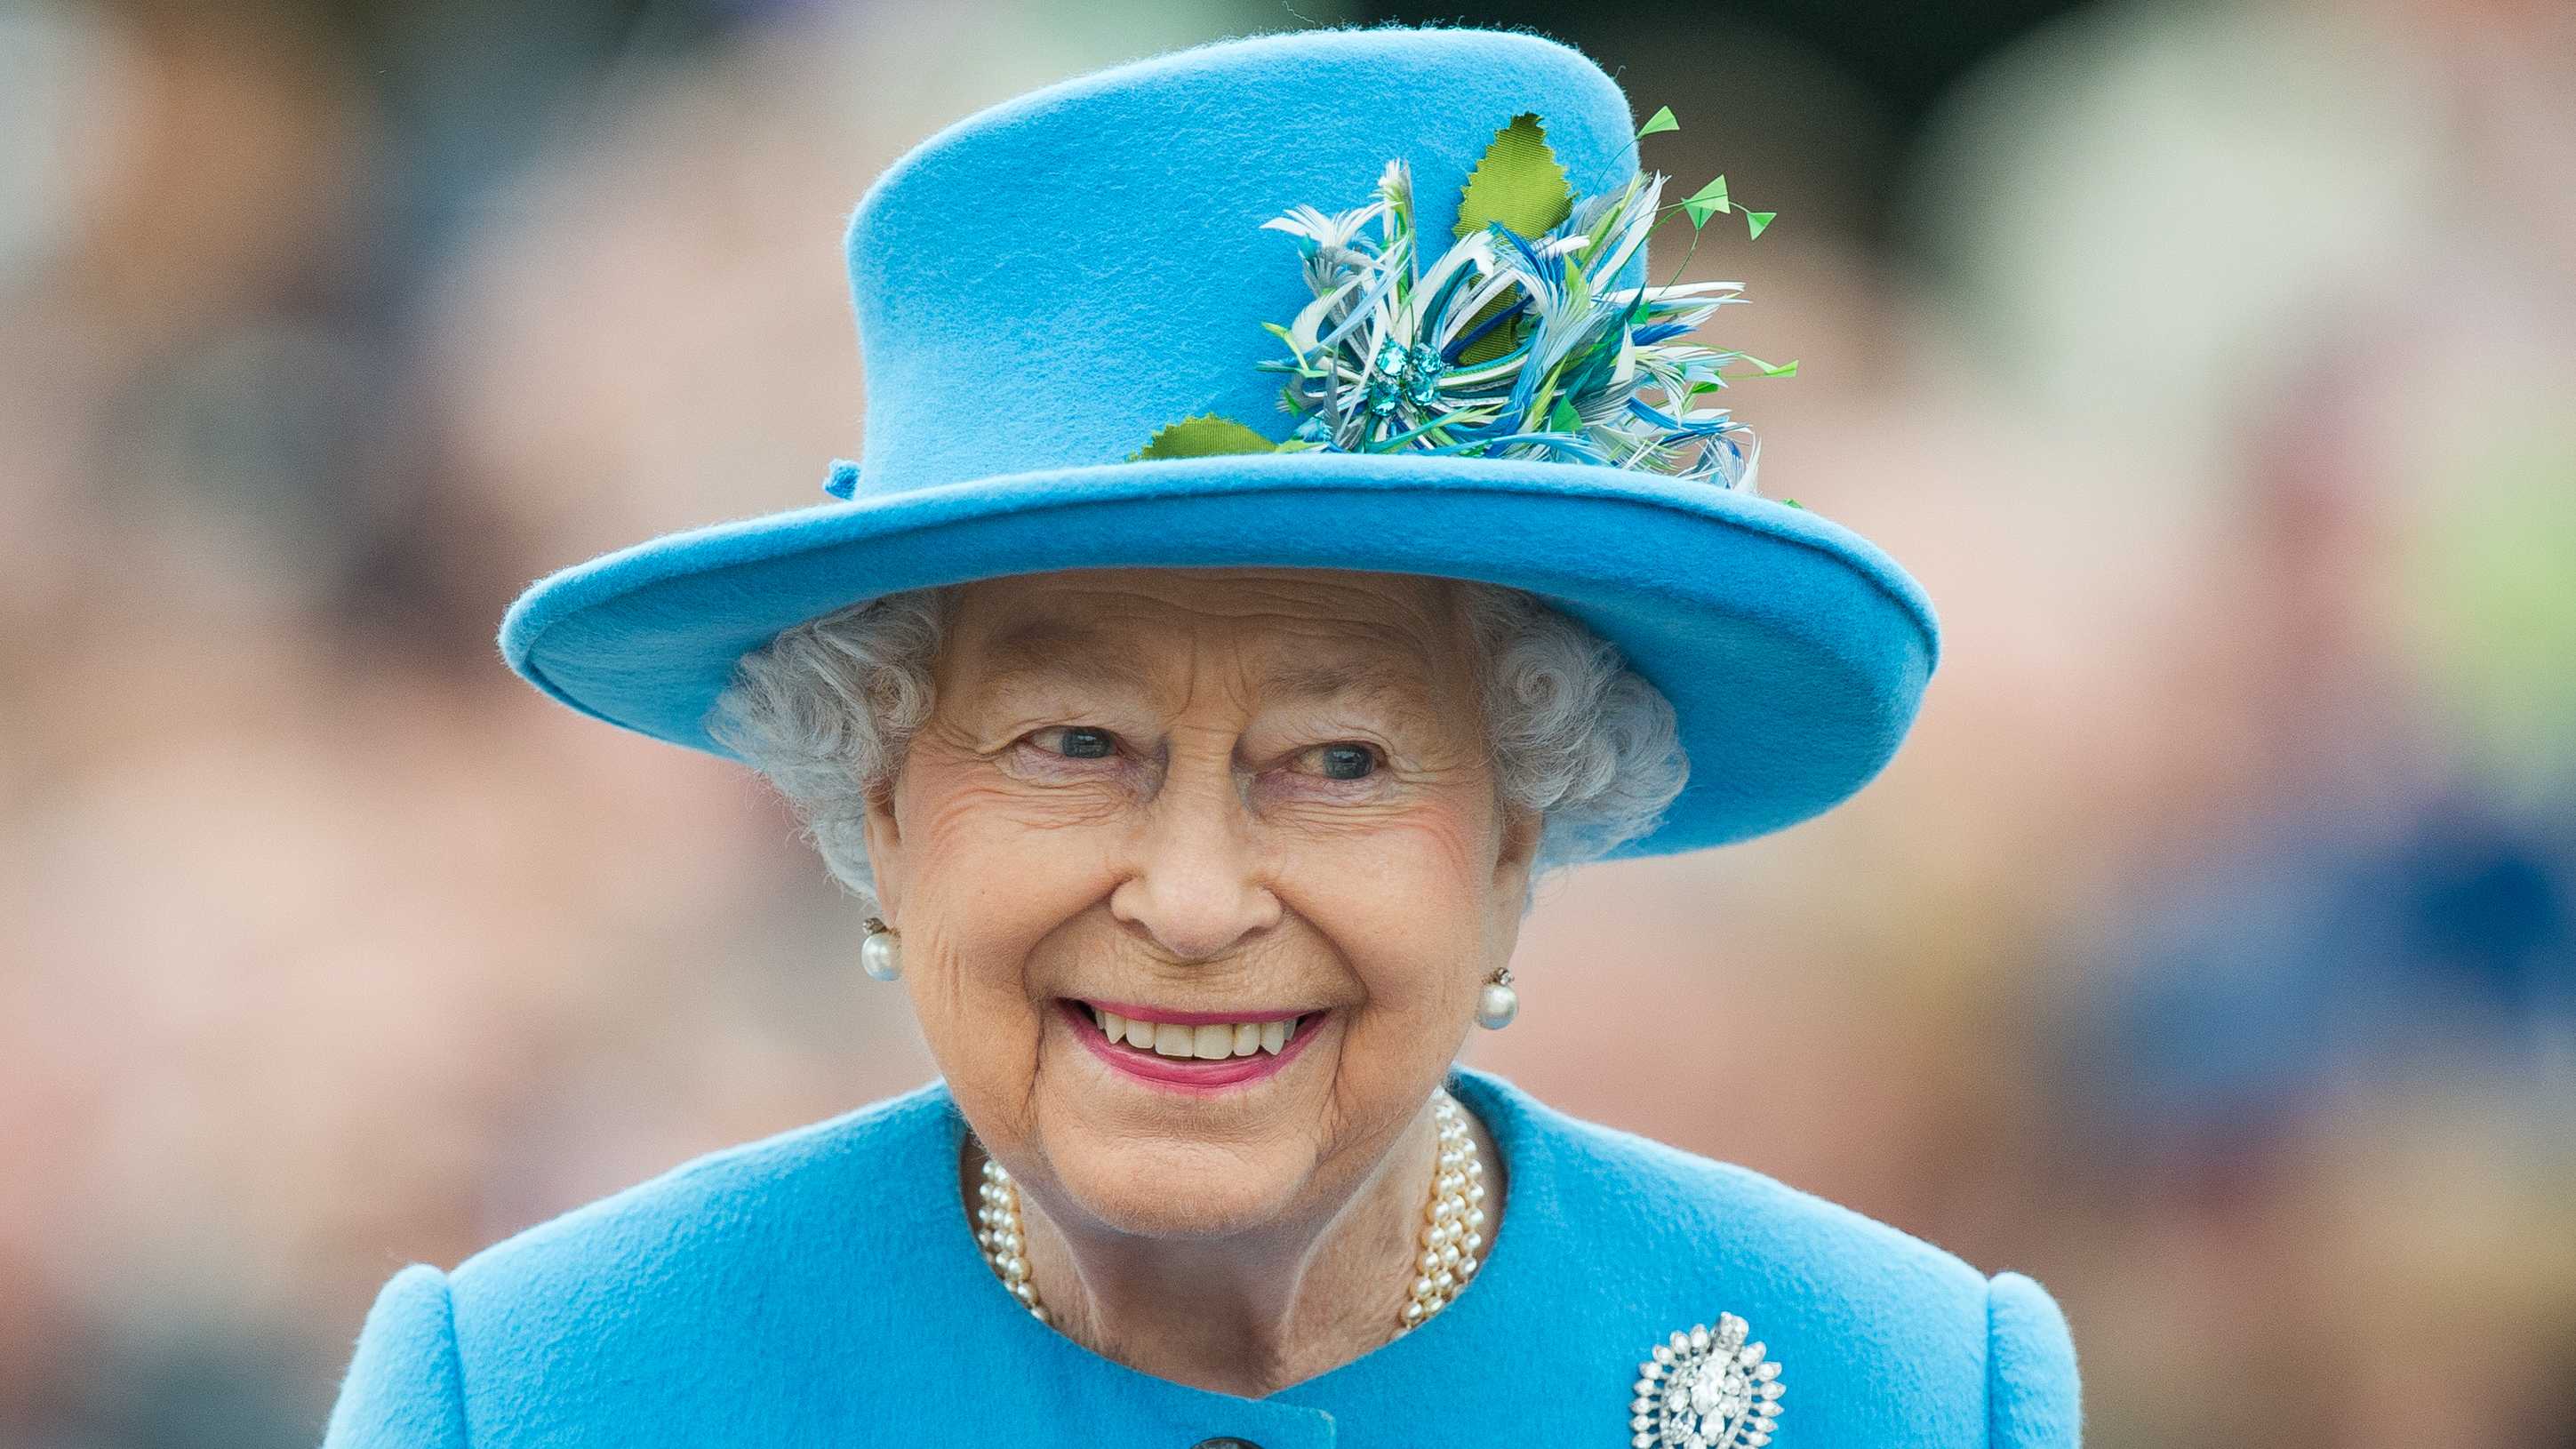 The mind-boggling way the Queen gets dressed in the morning